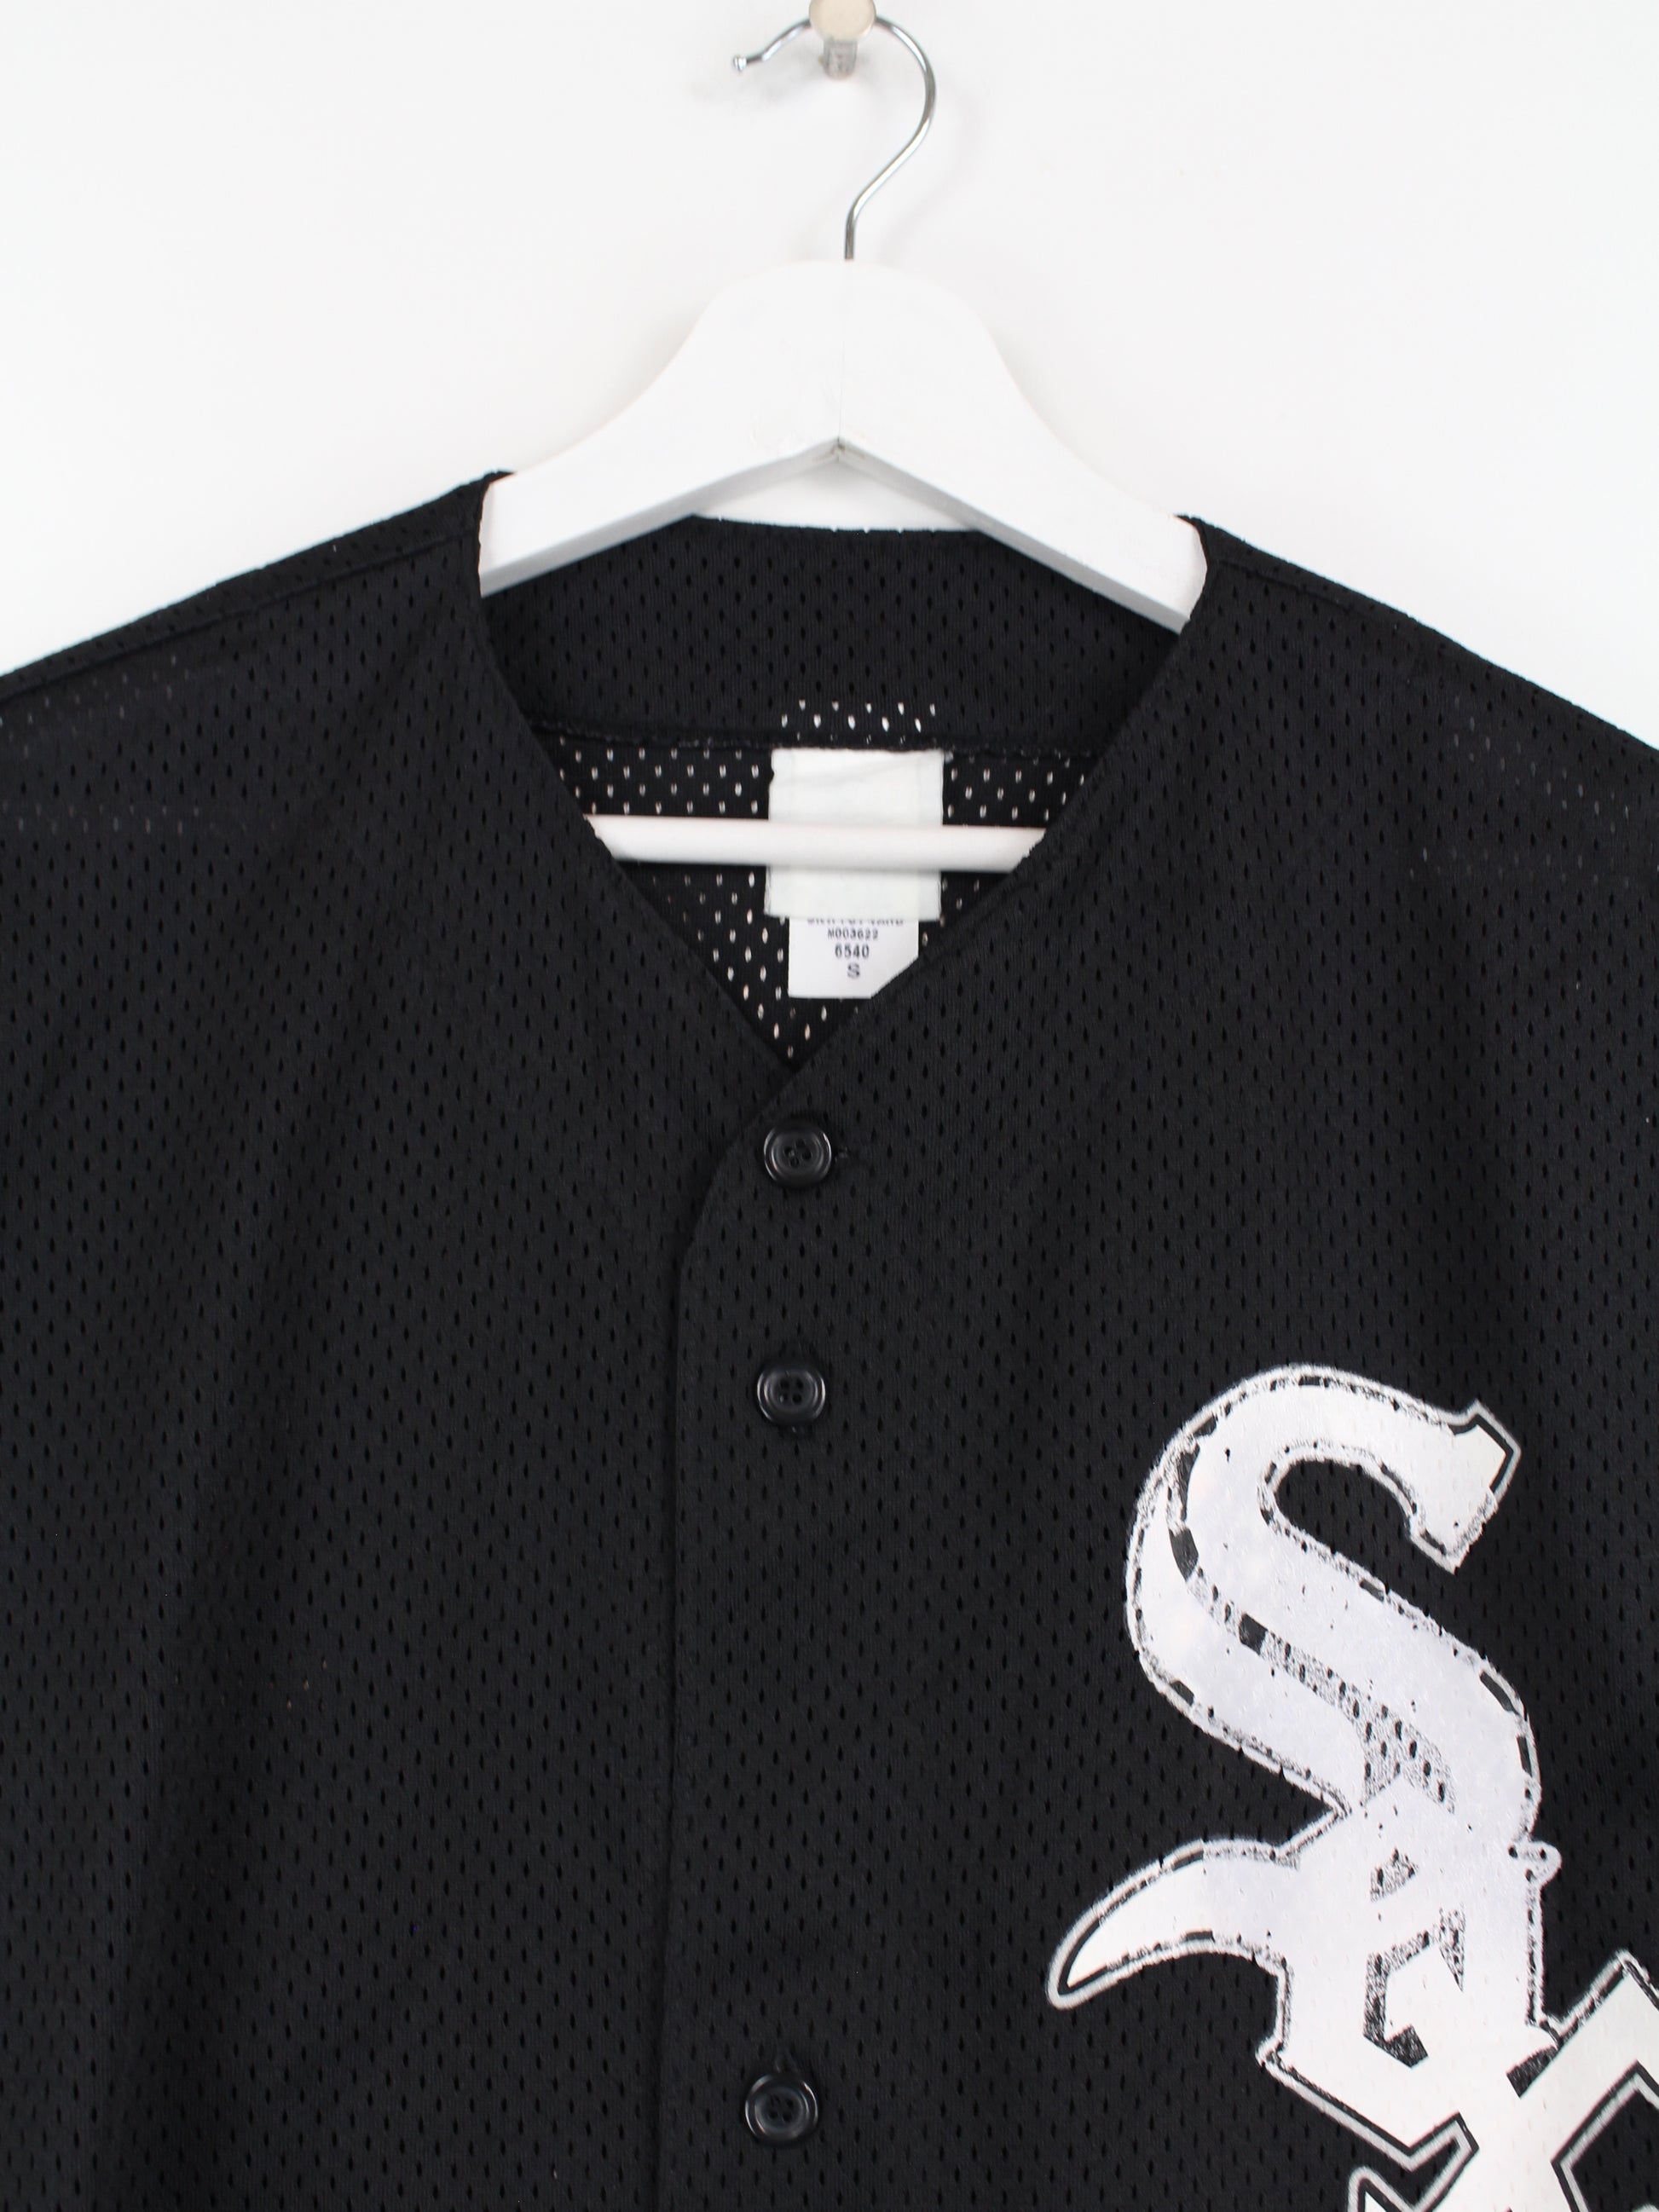 Buy White Sox Jersey Xl Online In India -  India